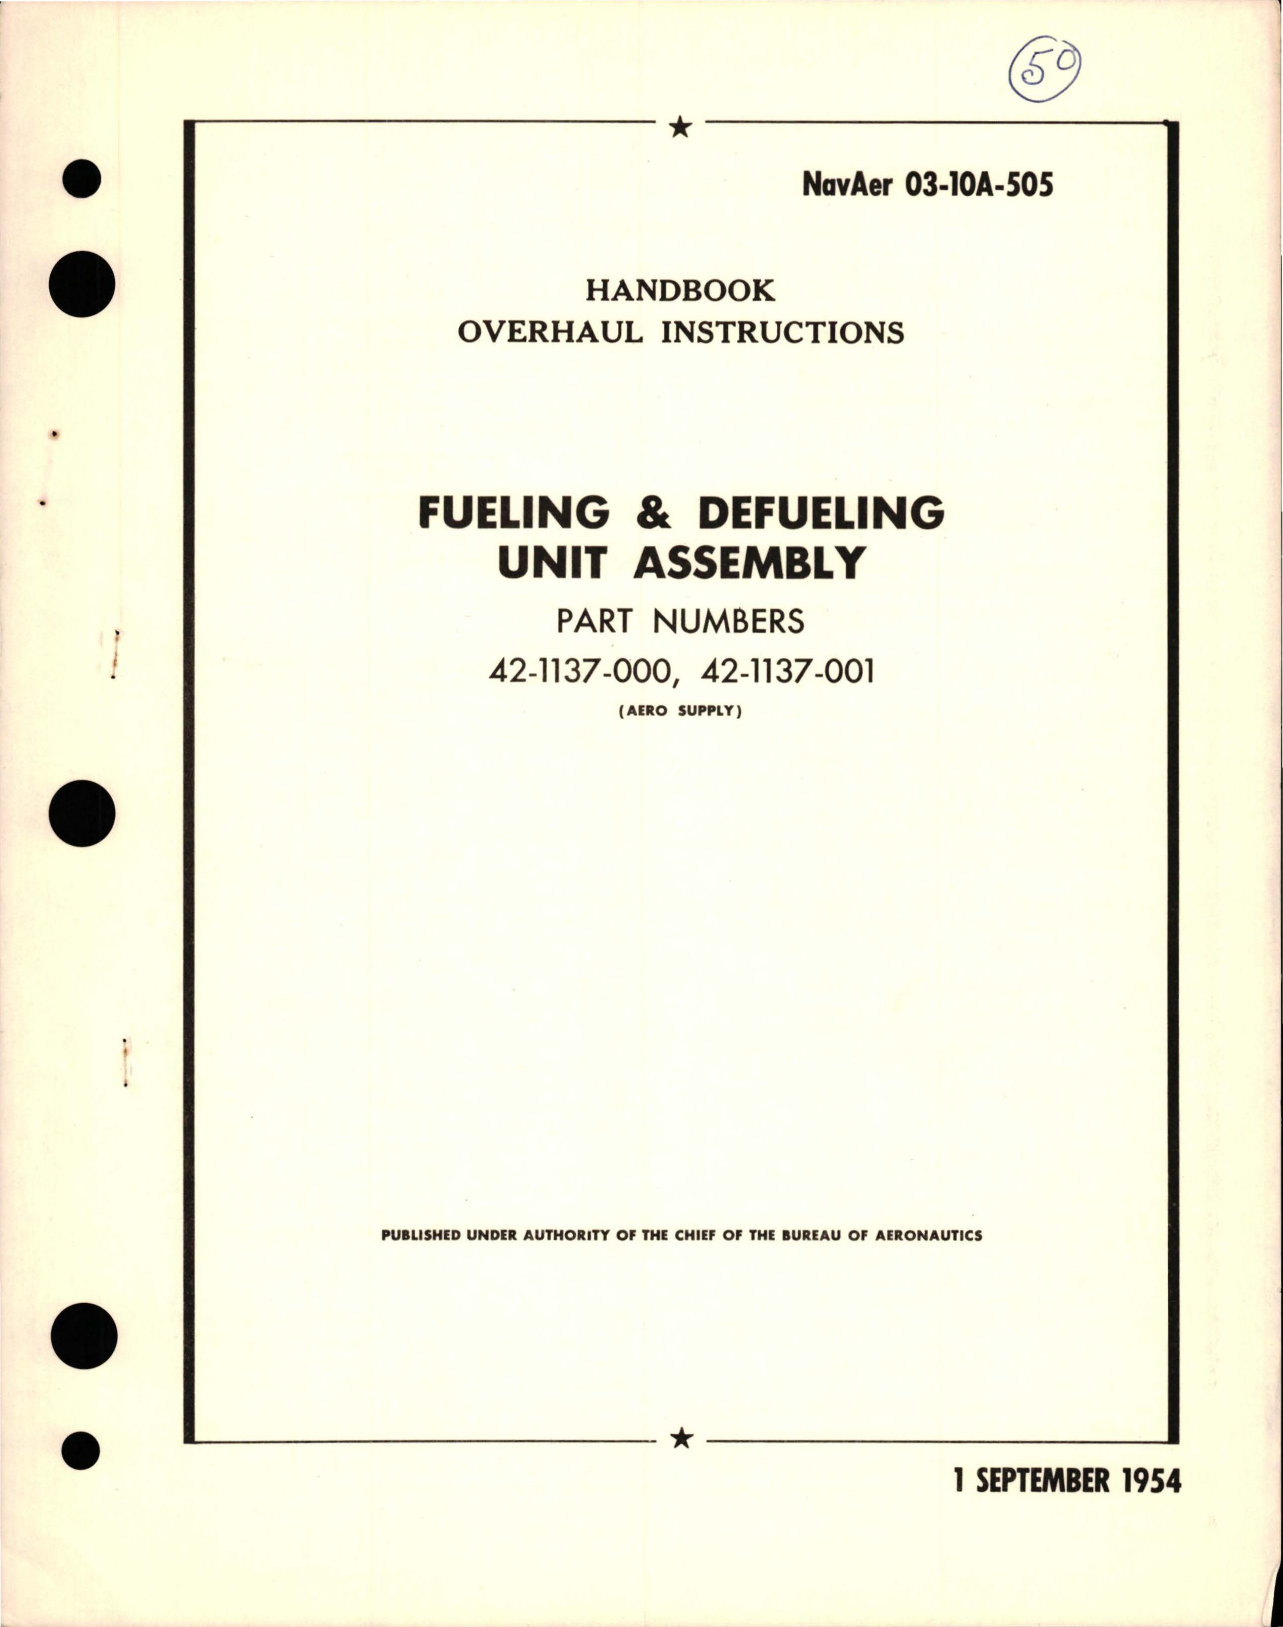 Sample page 1 from AirCorps Library document: Overhaul Instructions for Fueling and Defueling Unit Assembly - Parts 42-1137-000 and 42-1137-001